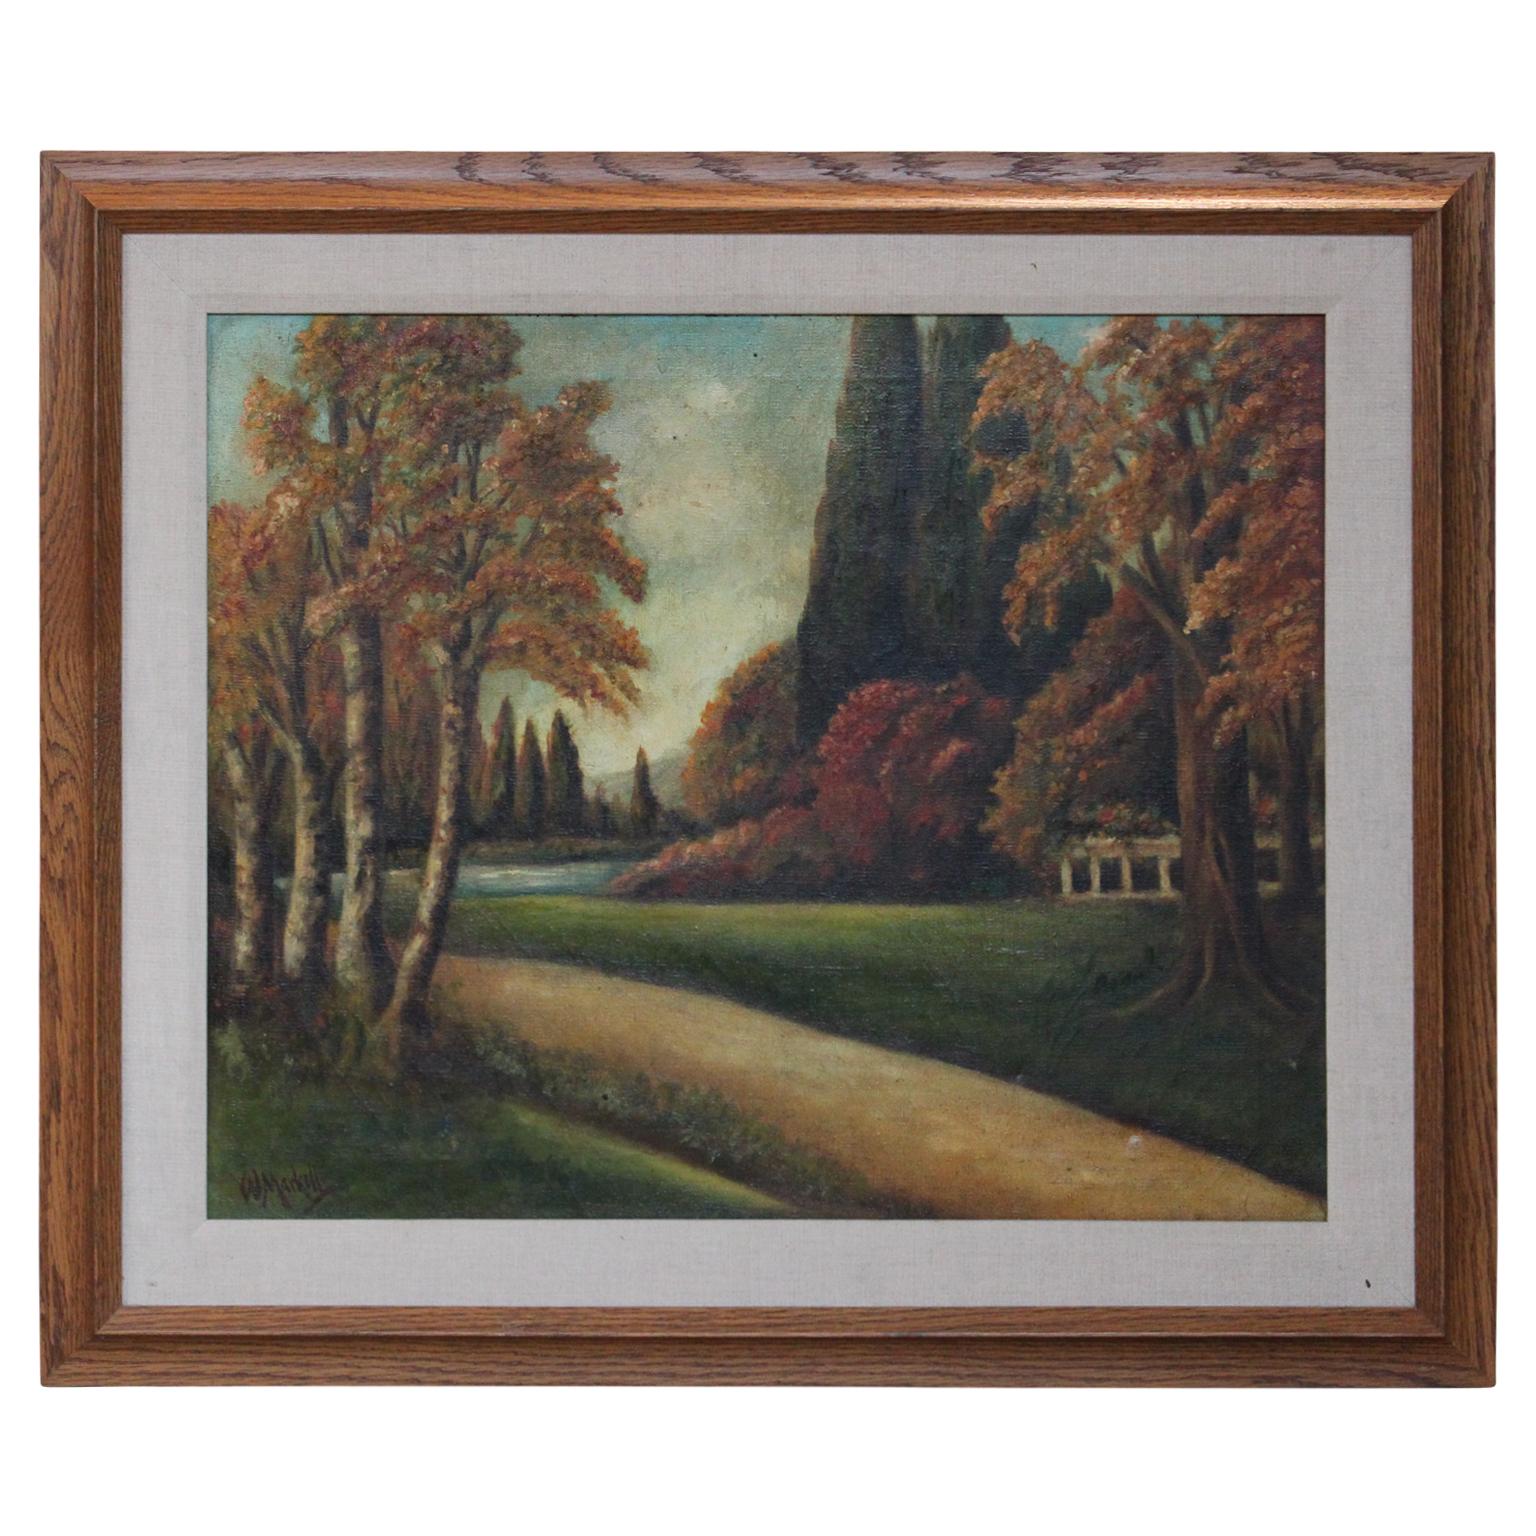 W. Markell Landscape Painting - Fall Landscape with Pathway